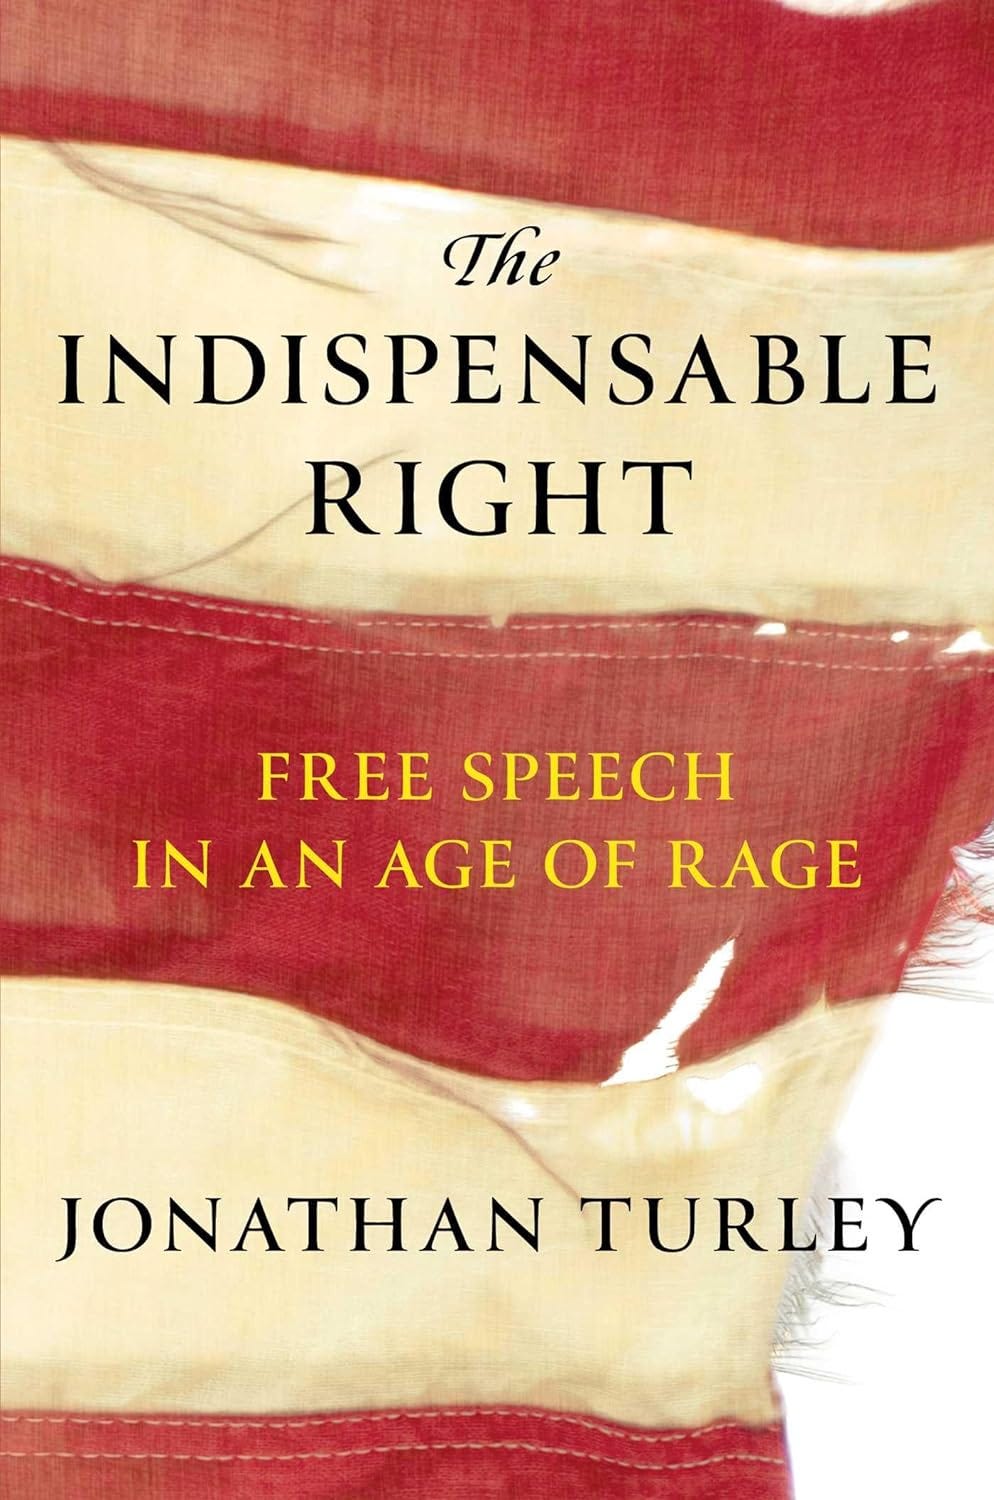 The Indispensable Right: Free Speech in an Age of Rage PDF